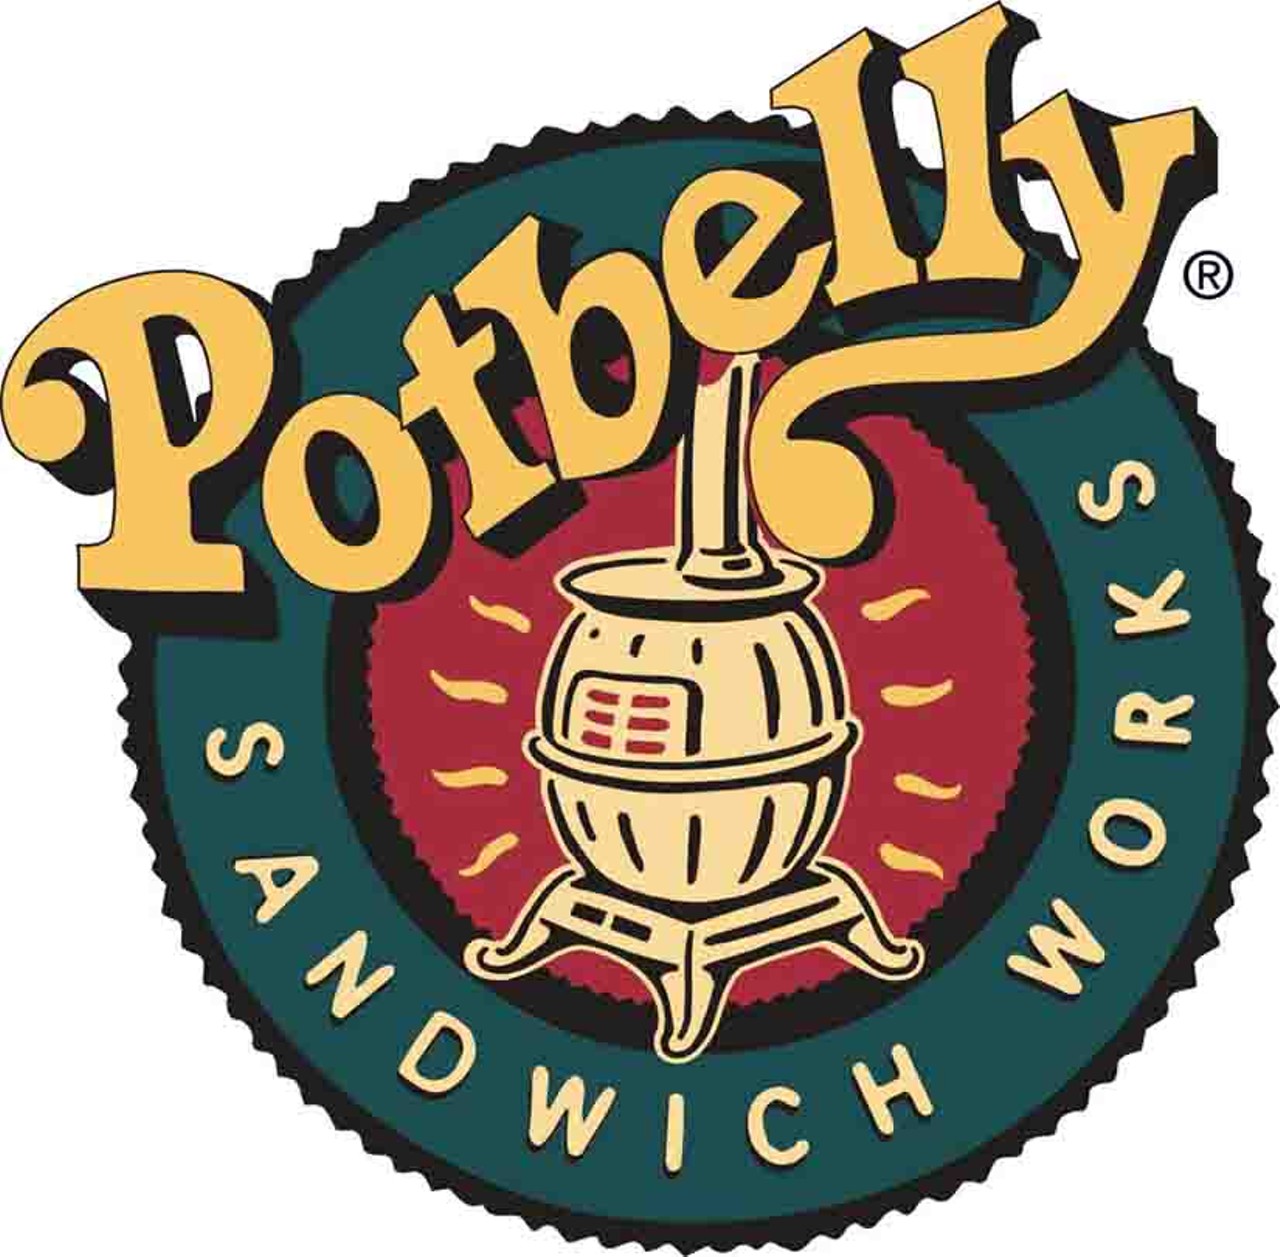 Potbelly Sandwich Shop 
For a sandwich served fresh, fast, and friendly visit Potbelly. With a variety of great sandwiches, you&#146;re sure to leave happy [Gate B2]